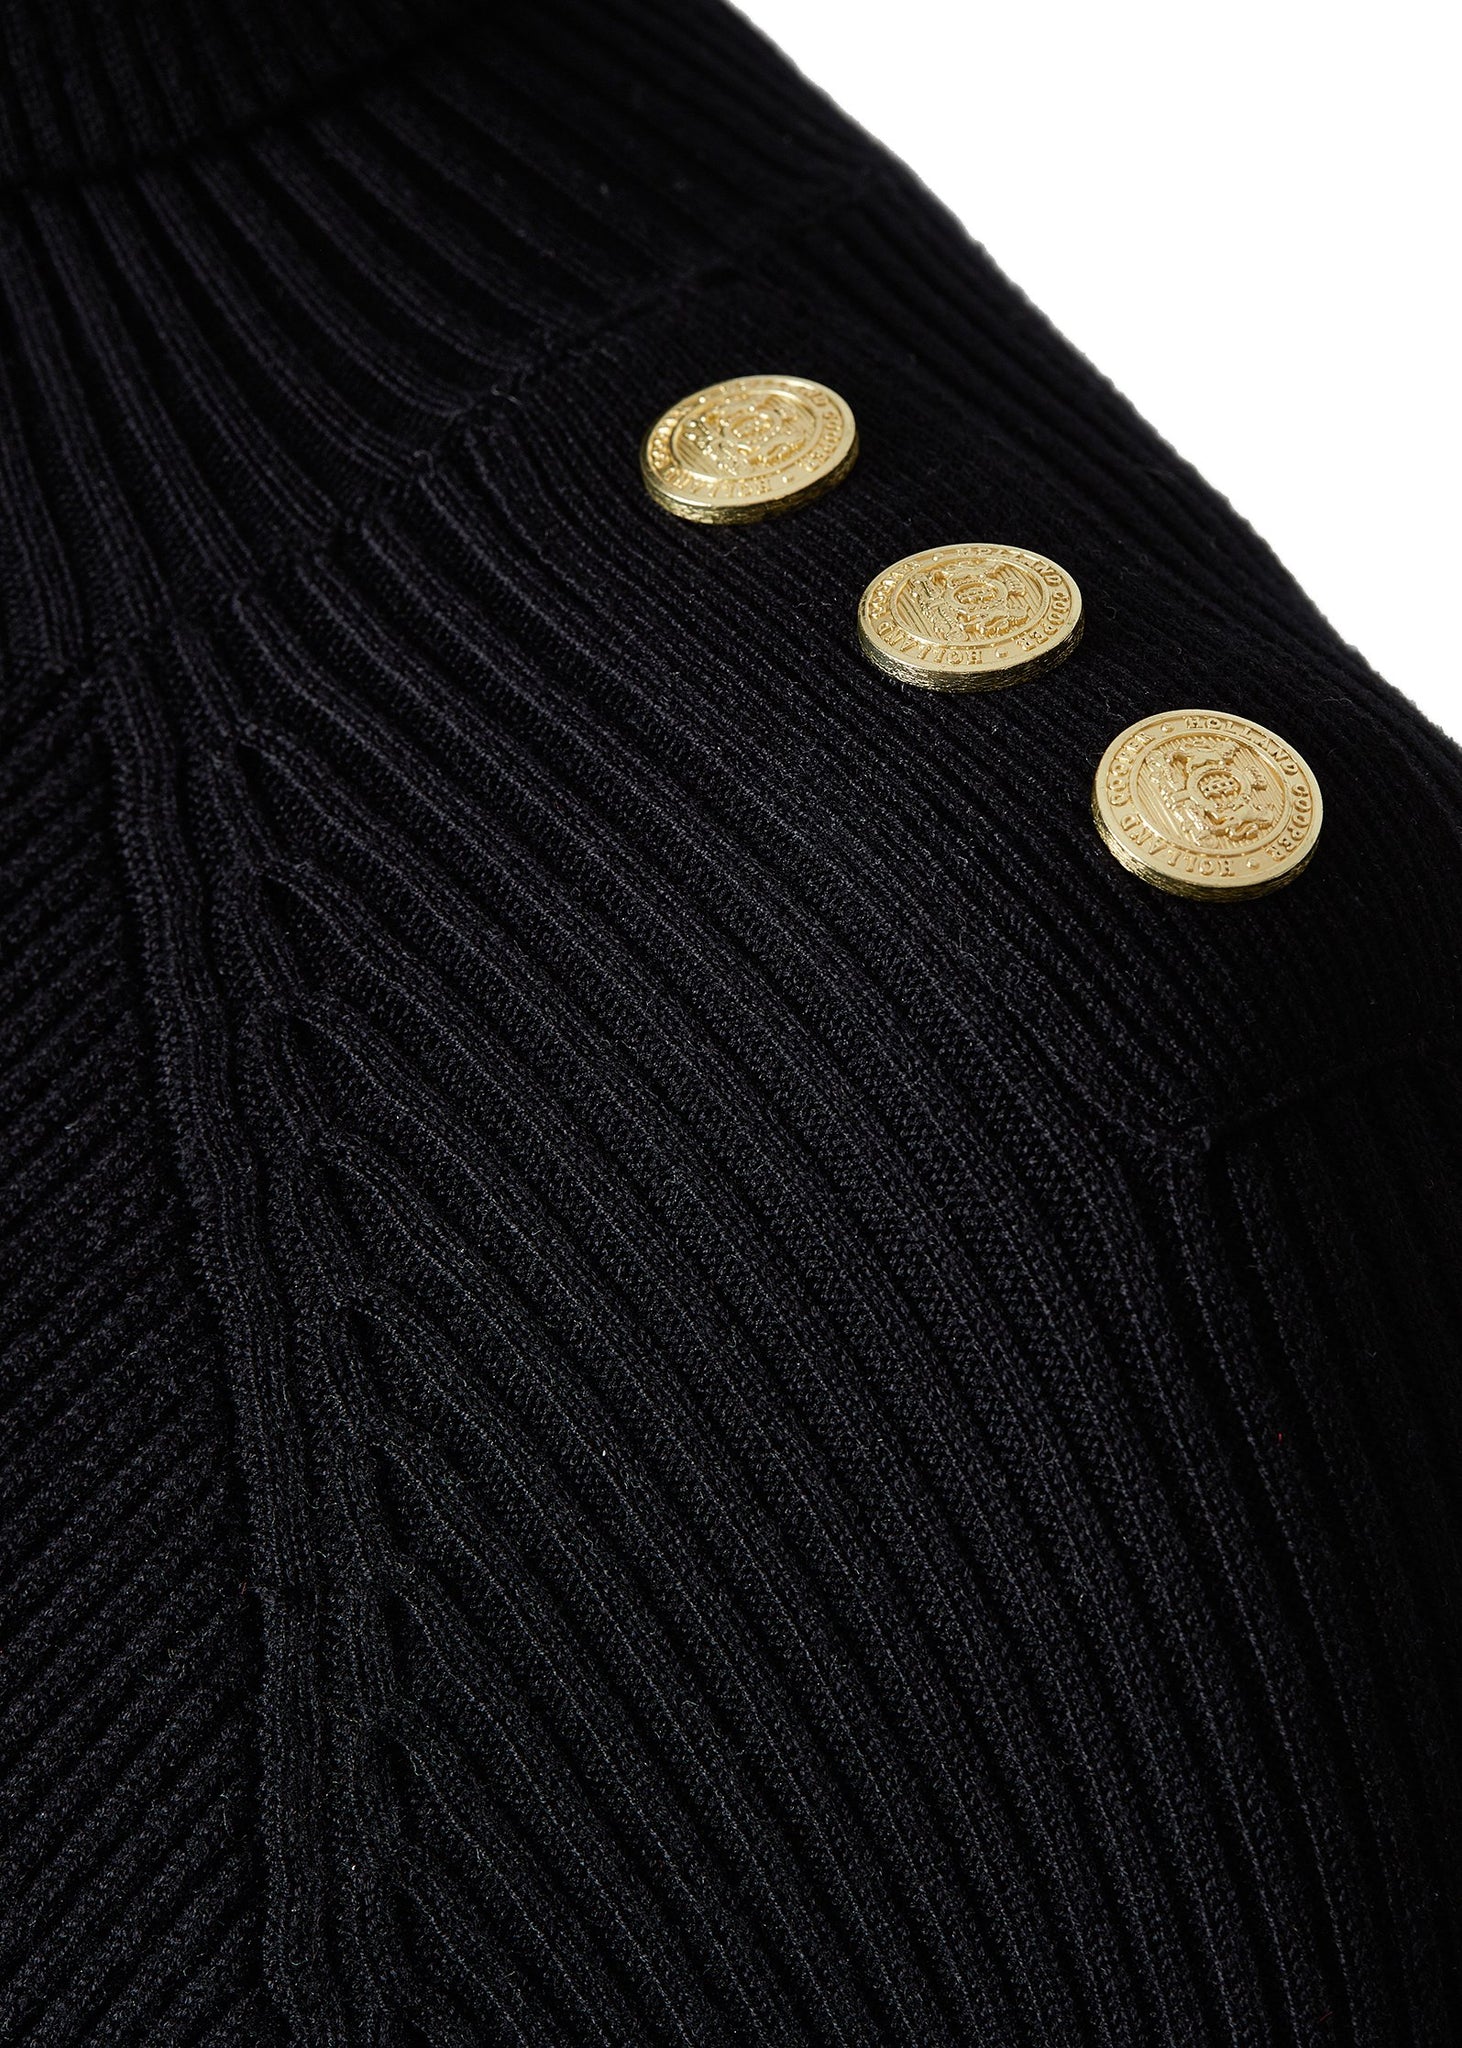 detailed shot of gold buttons on shoulder of womens black knitted roll neck midi dress 